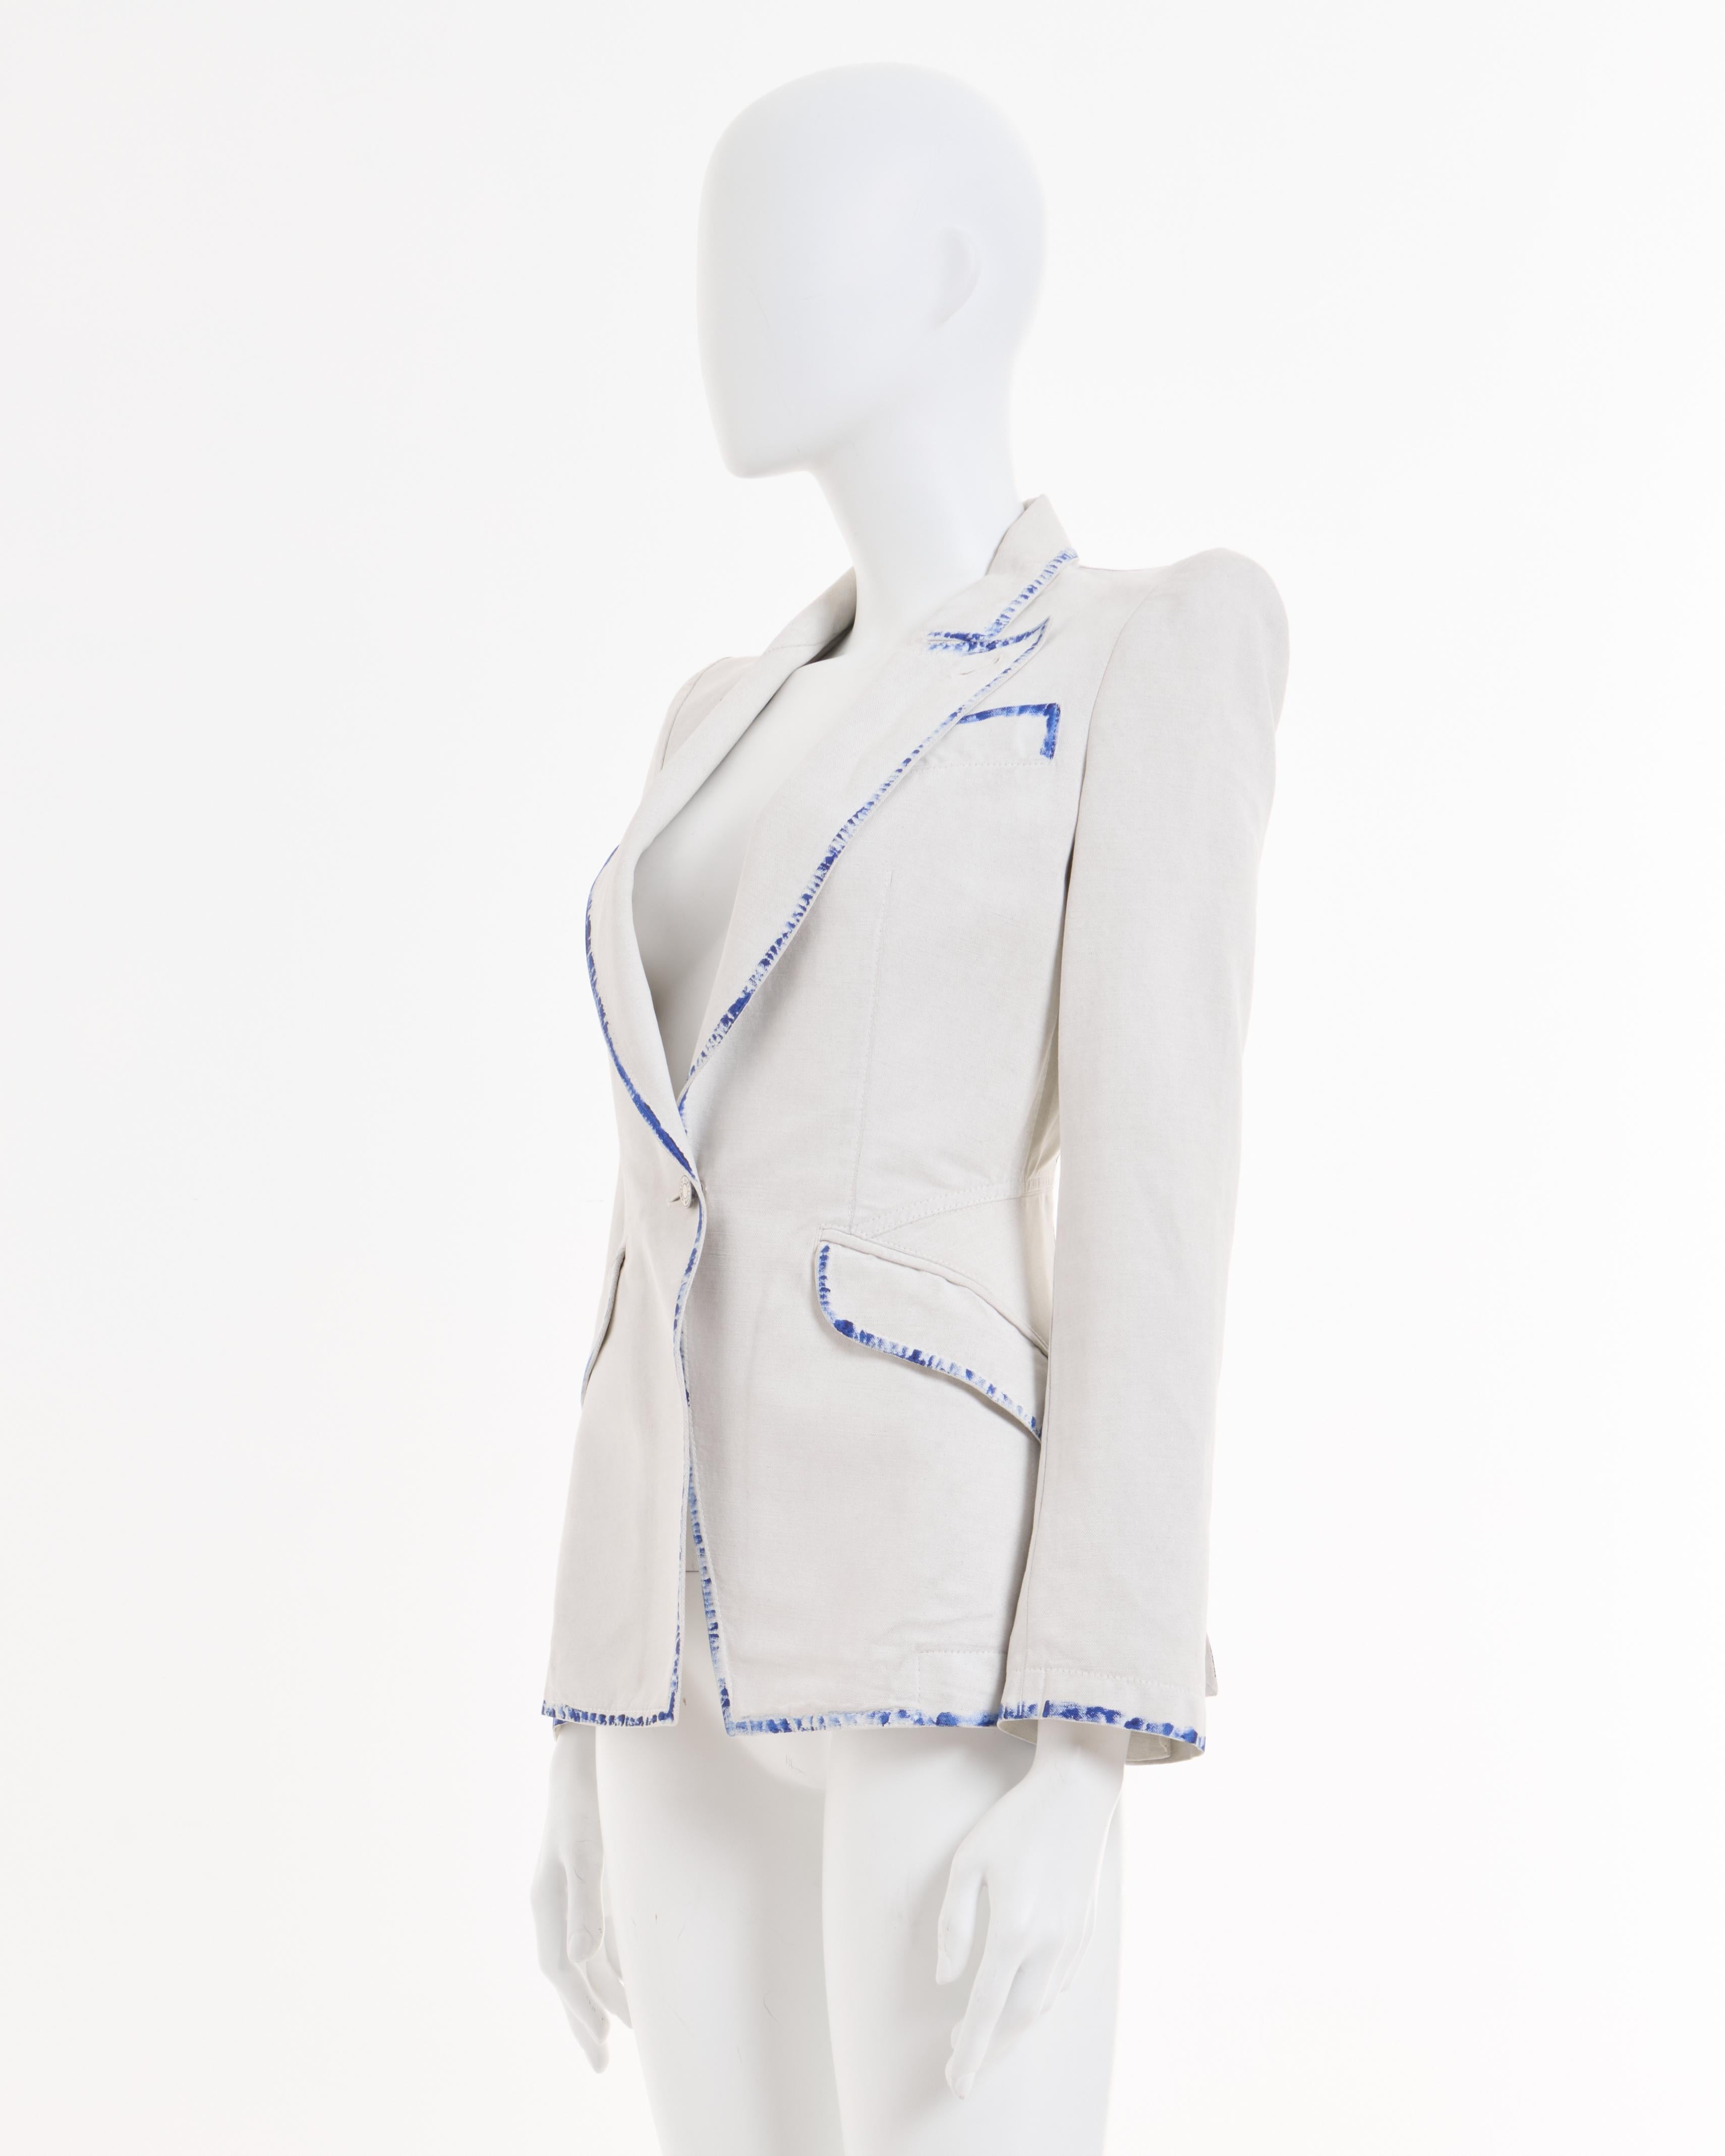 - Alexander McQueen designed by Alexander McQueen 
- Sold by Skof.Archive 
- Resort 2010
- White Cotton canvas blazer 
- Hand painted profilature in blue tone 
- Padded shoulders 
- Fitted to the body 
- Fully lined 
- Made in Italy
- Size: FR 36 -